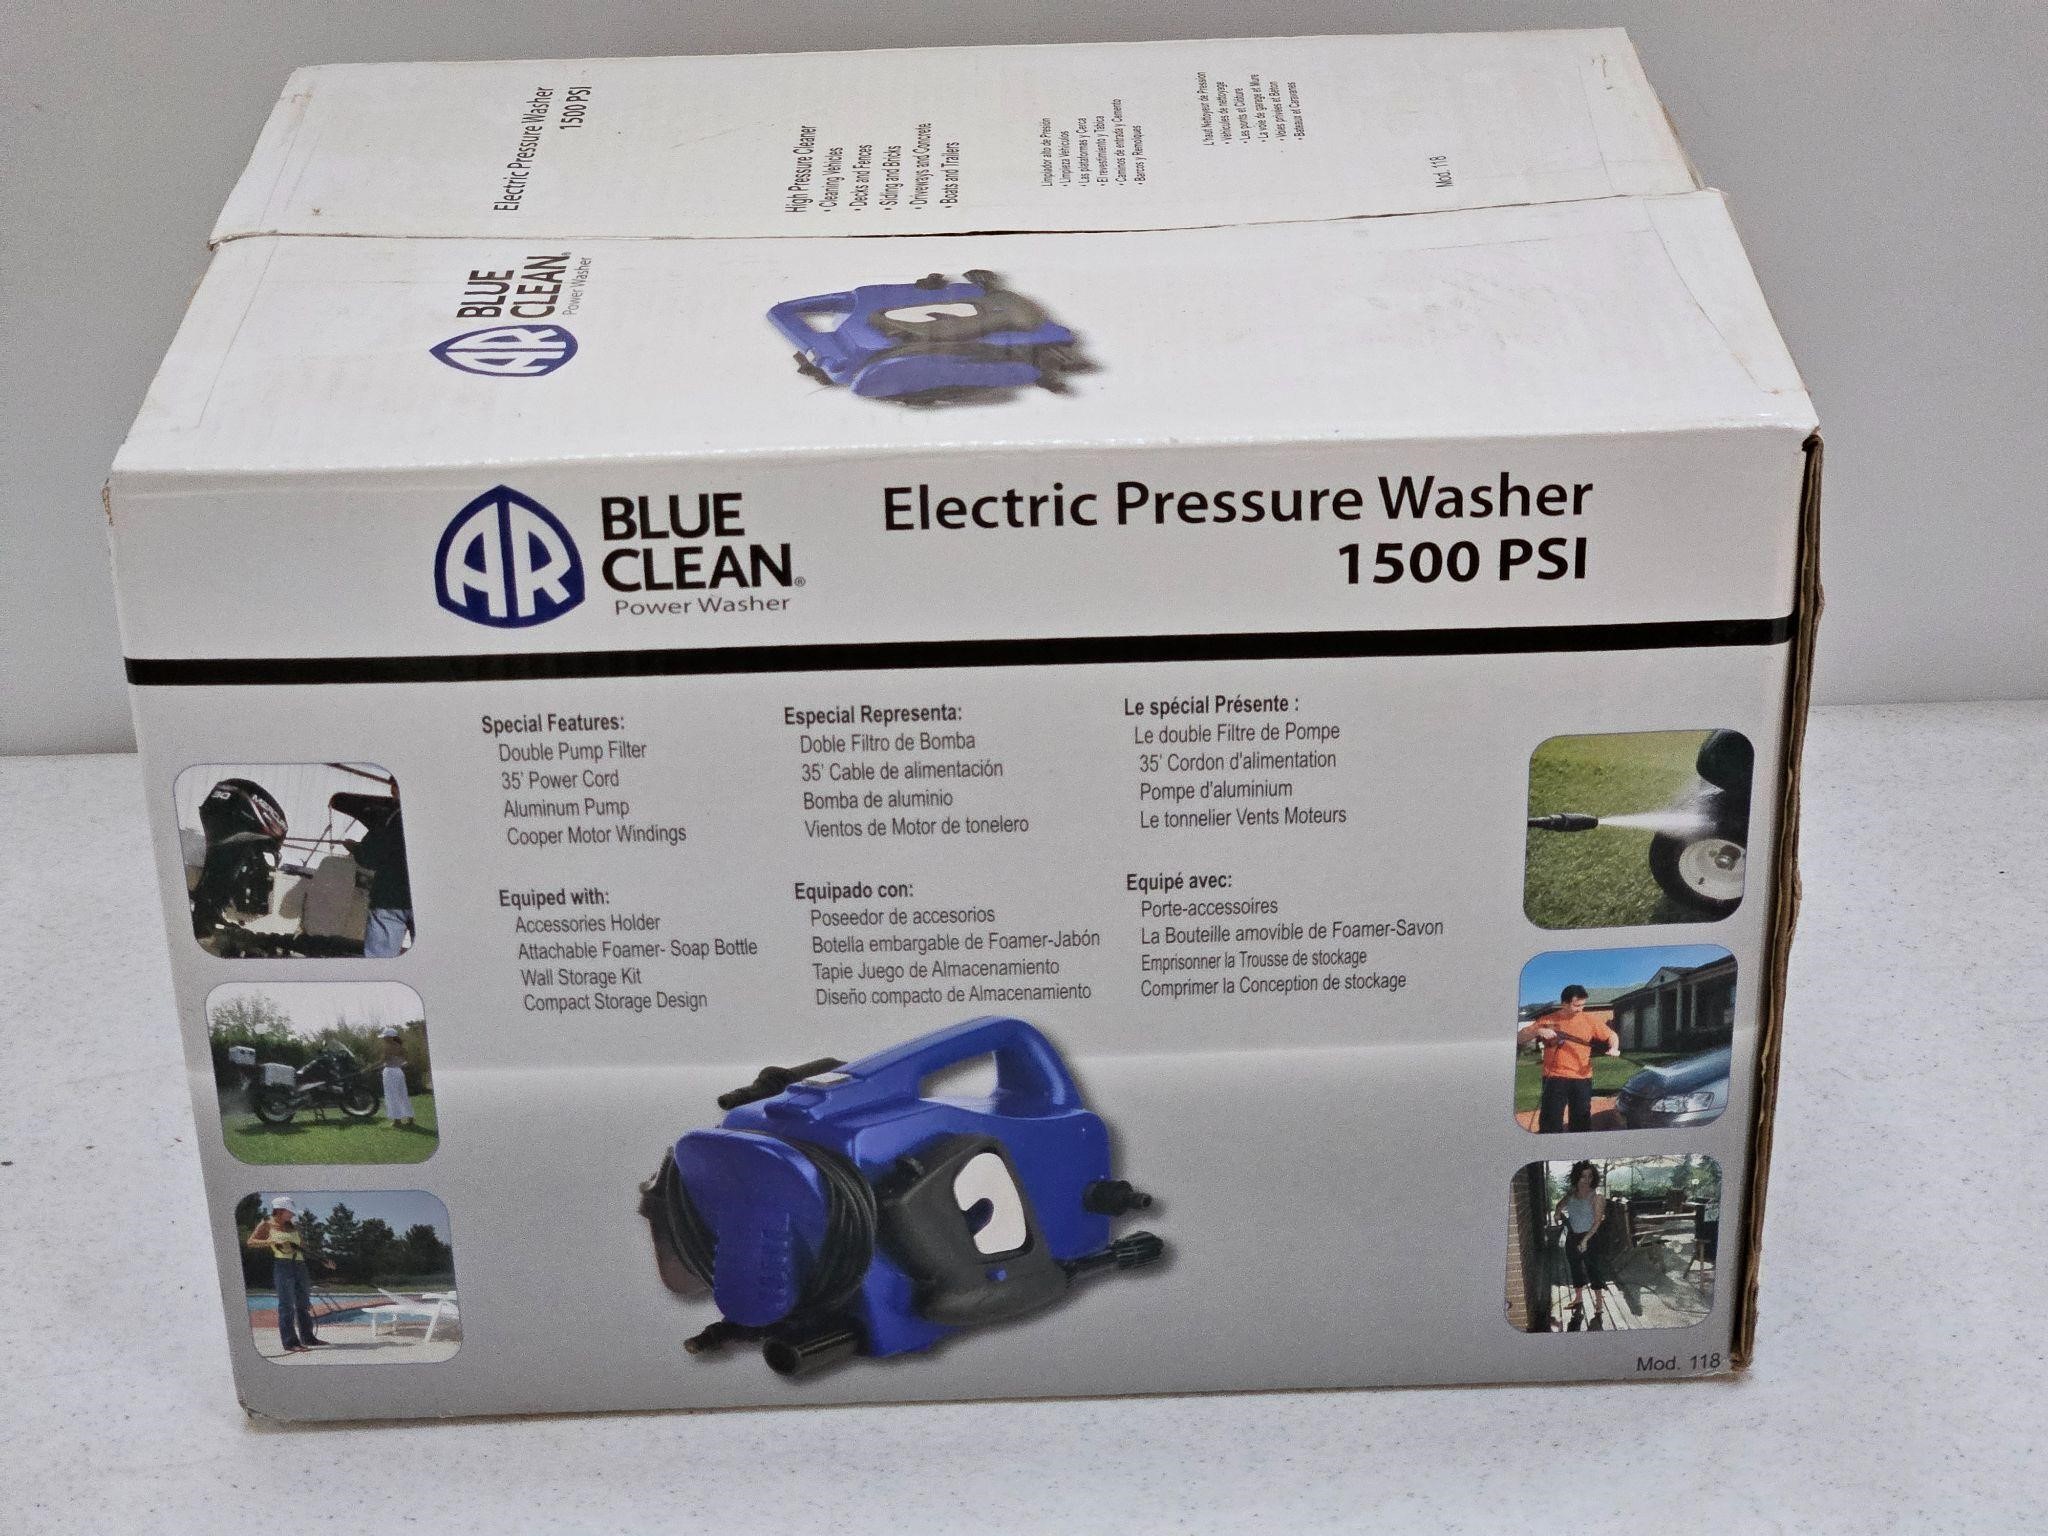 BLUE CLEAN POWER WASHER 1500 PSI